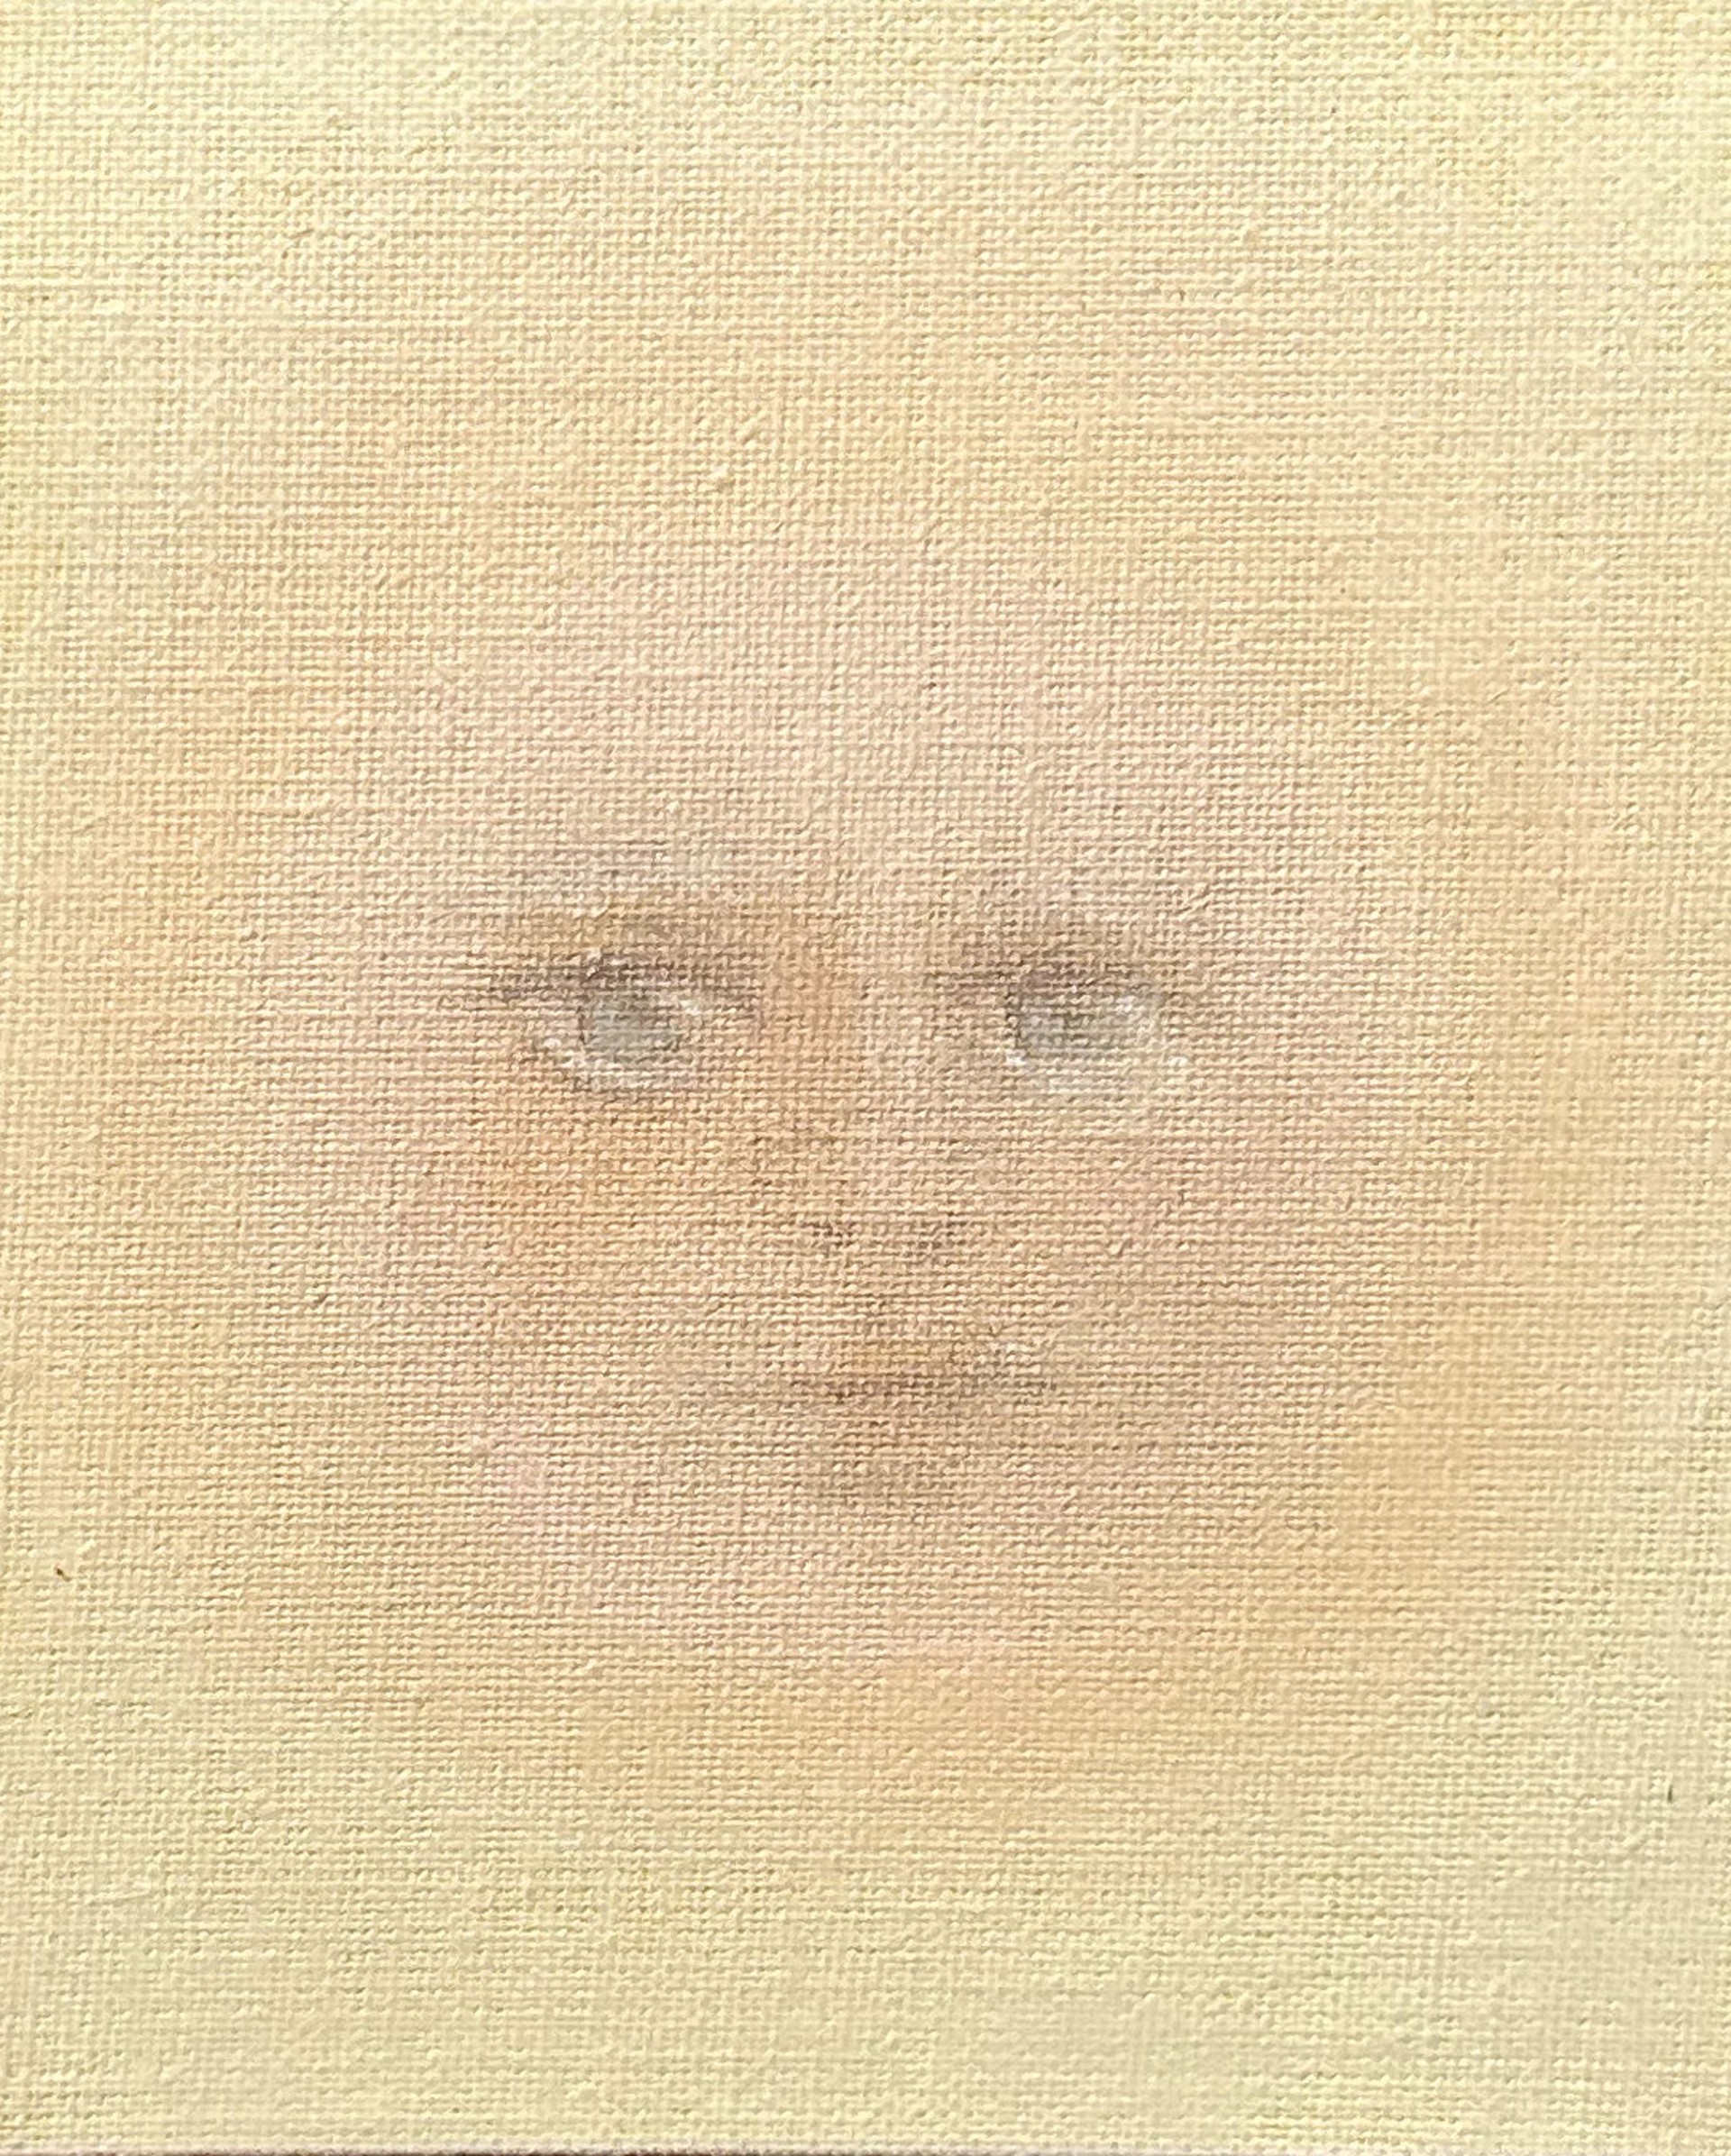 Moonface - pale pink on pale yellow by Leila McConnell